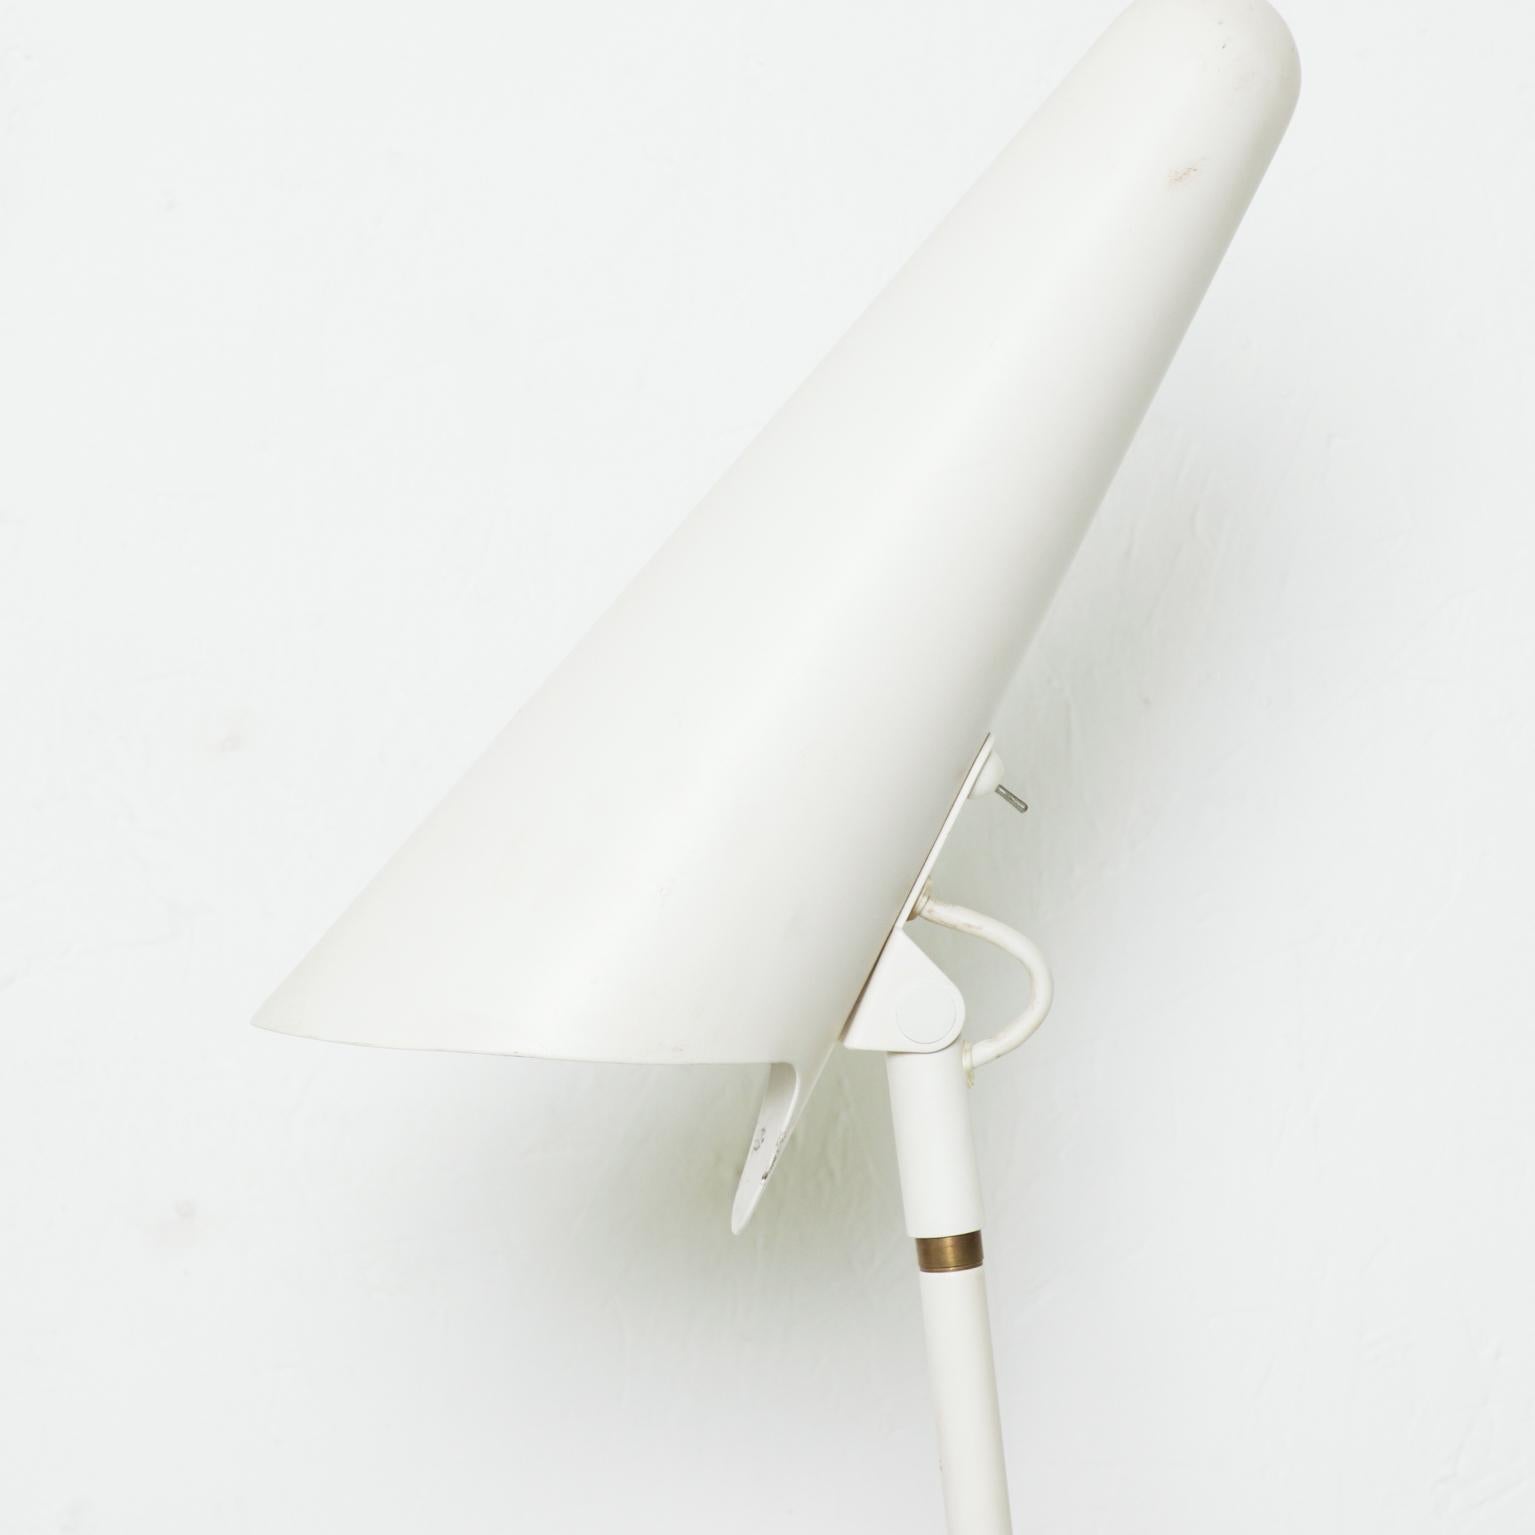 AMBIANIC presents
Mid Century Modern white atomic age single cone head tension tole floor lamp, style Eames 1960s
57 H x 12 in diameter
Selling in as is fair vintage condition. Not working, untested, maybe needs rewiring.
See images please.